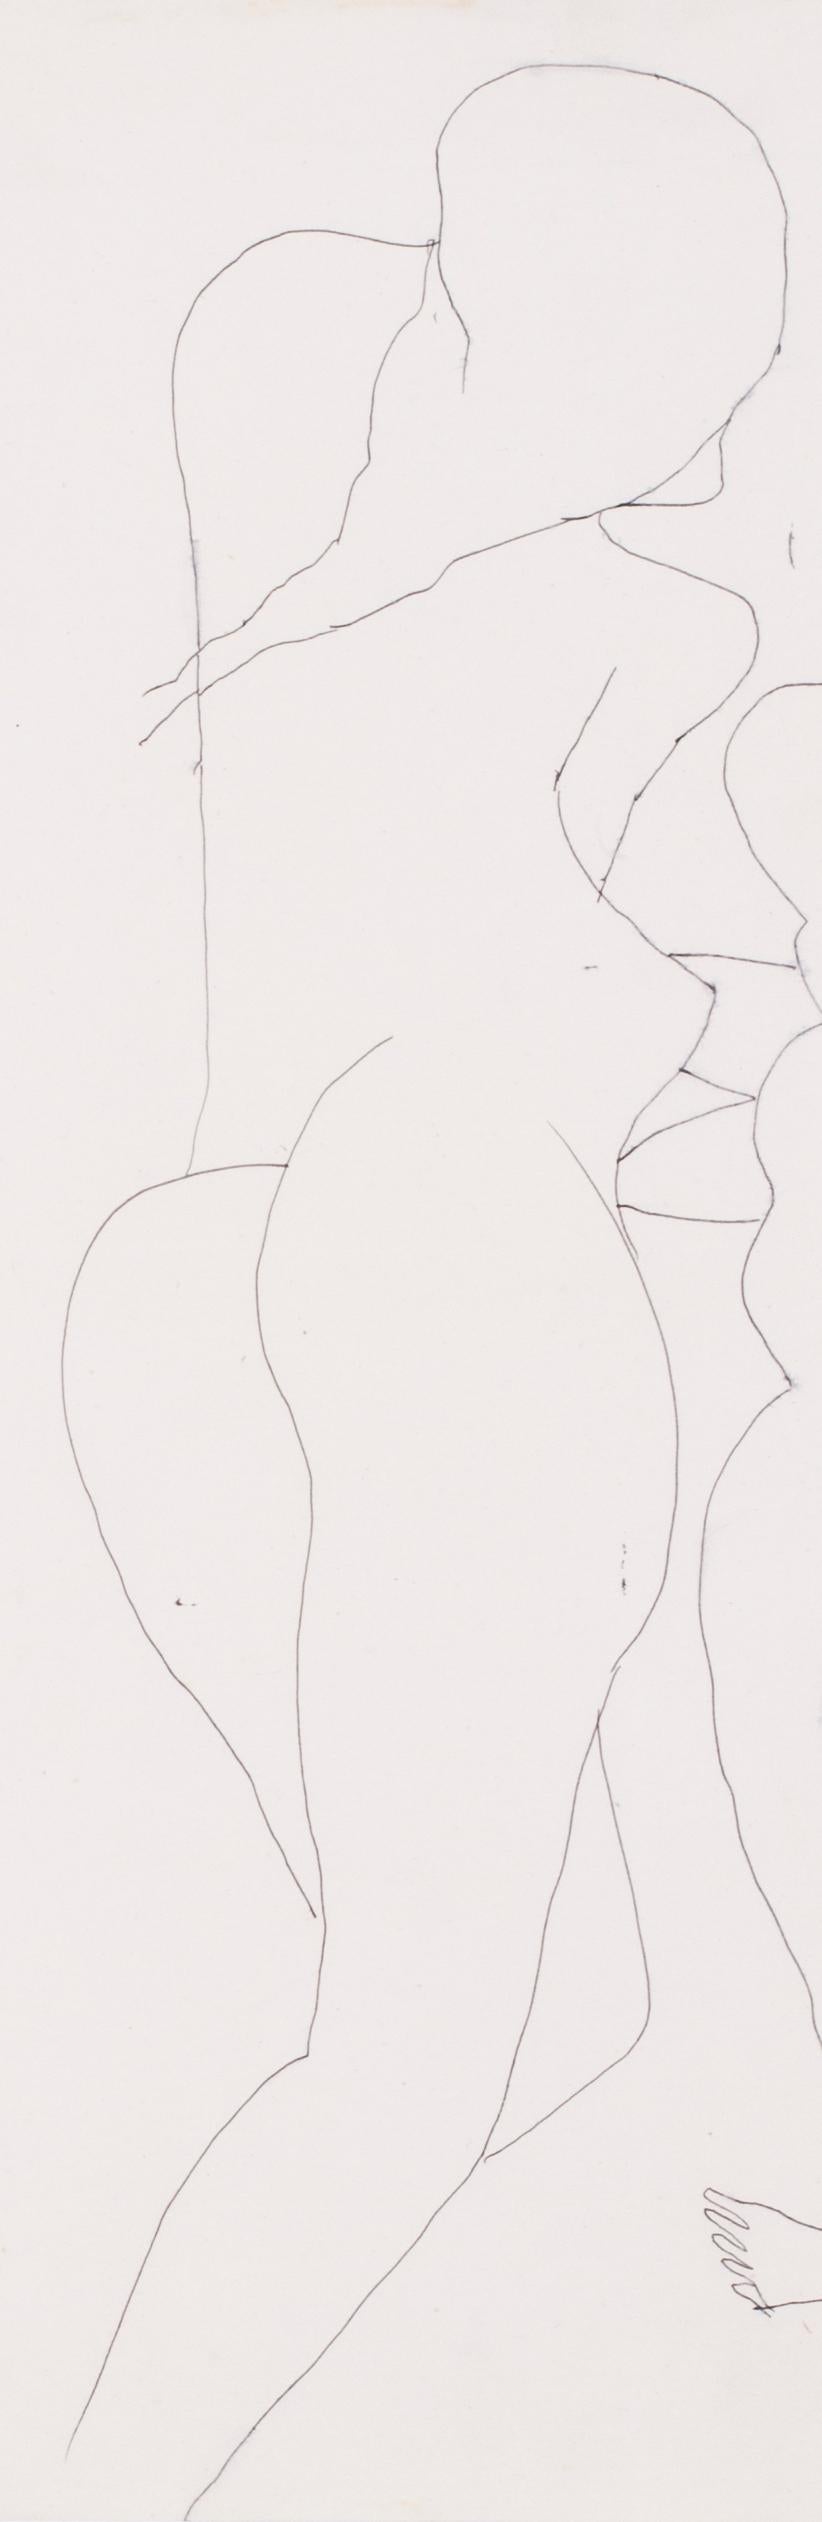 A 20th Century abstract drawing of female nudes by Indian artist F. N. Souza - Abstract Expressionist Art by FRANCIS NEWTON SOUZA